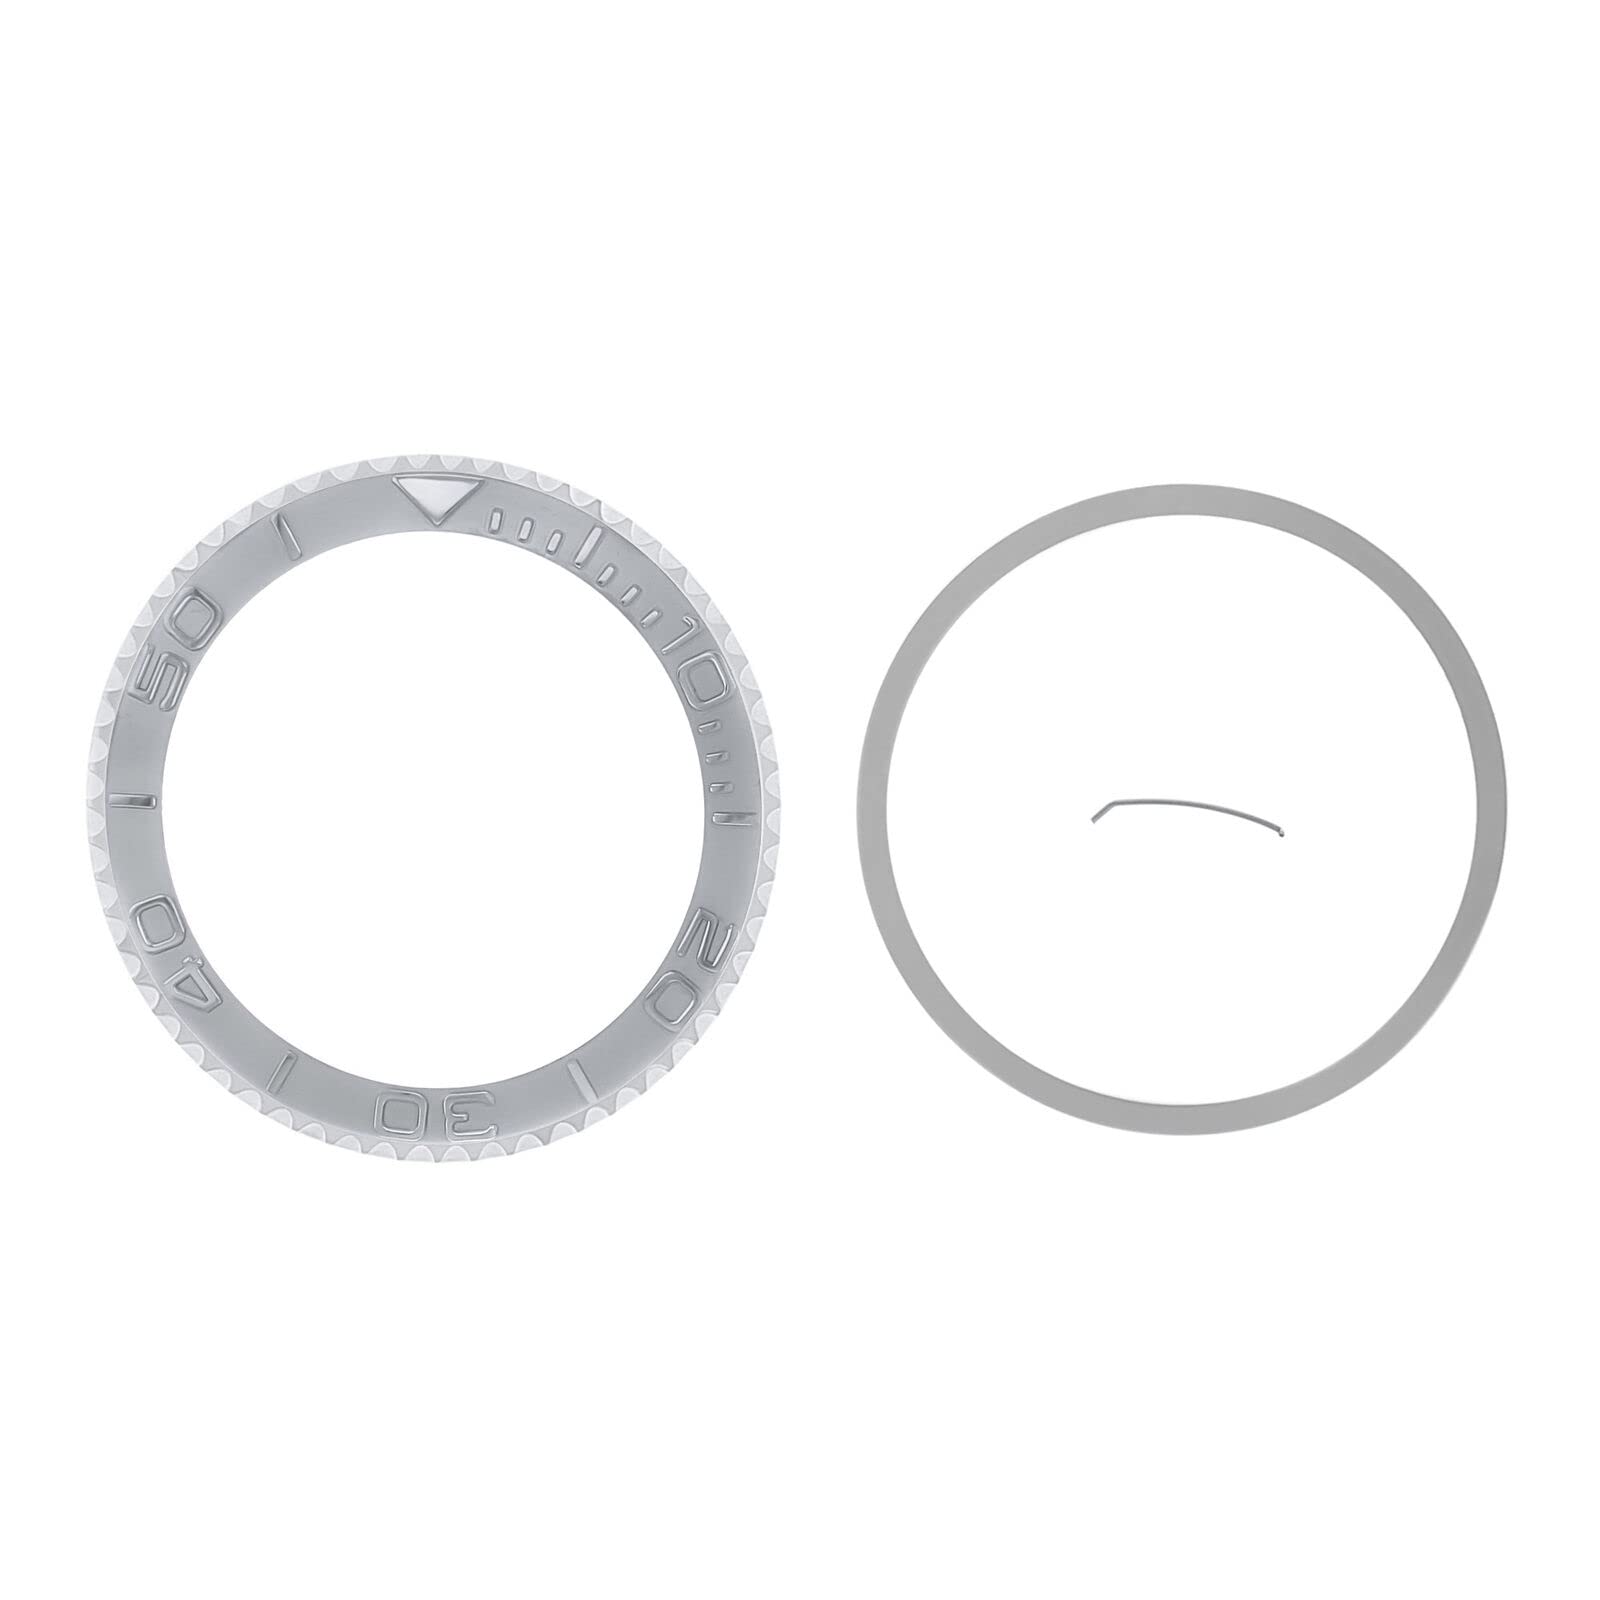 Ewatchparts BEZEL INSERT COMPLETE COMPATIBLE WITH YACHTMASTER 16800 16608 16610 16613 STAINLESS STEEL